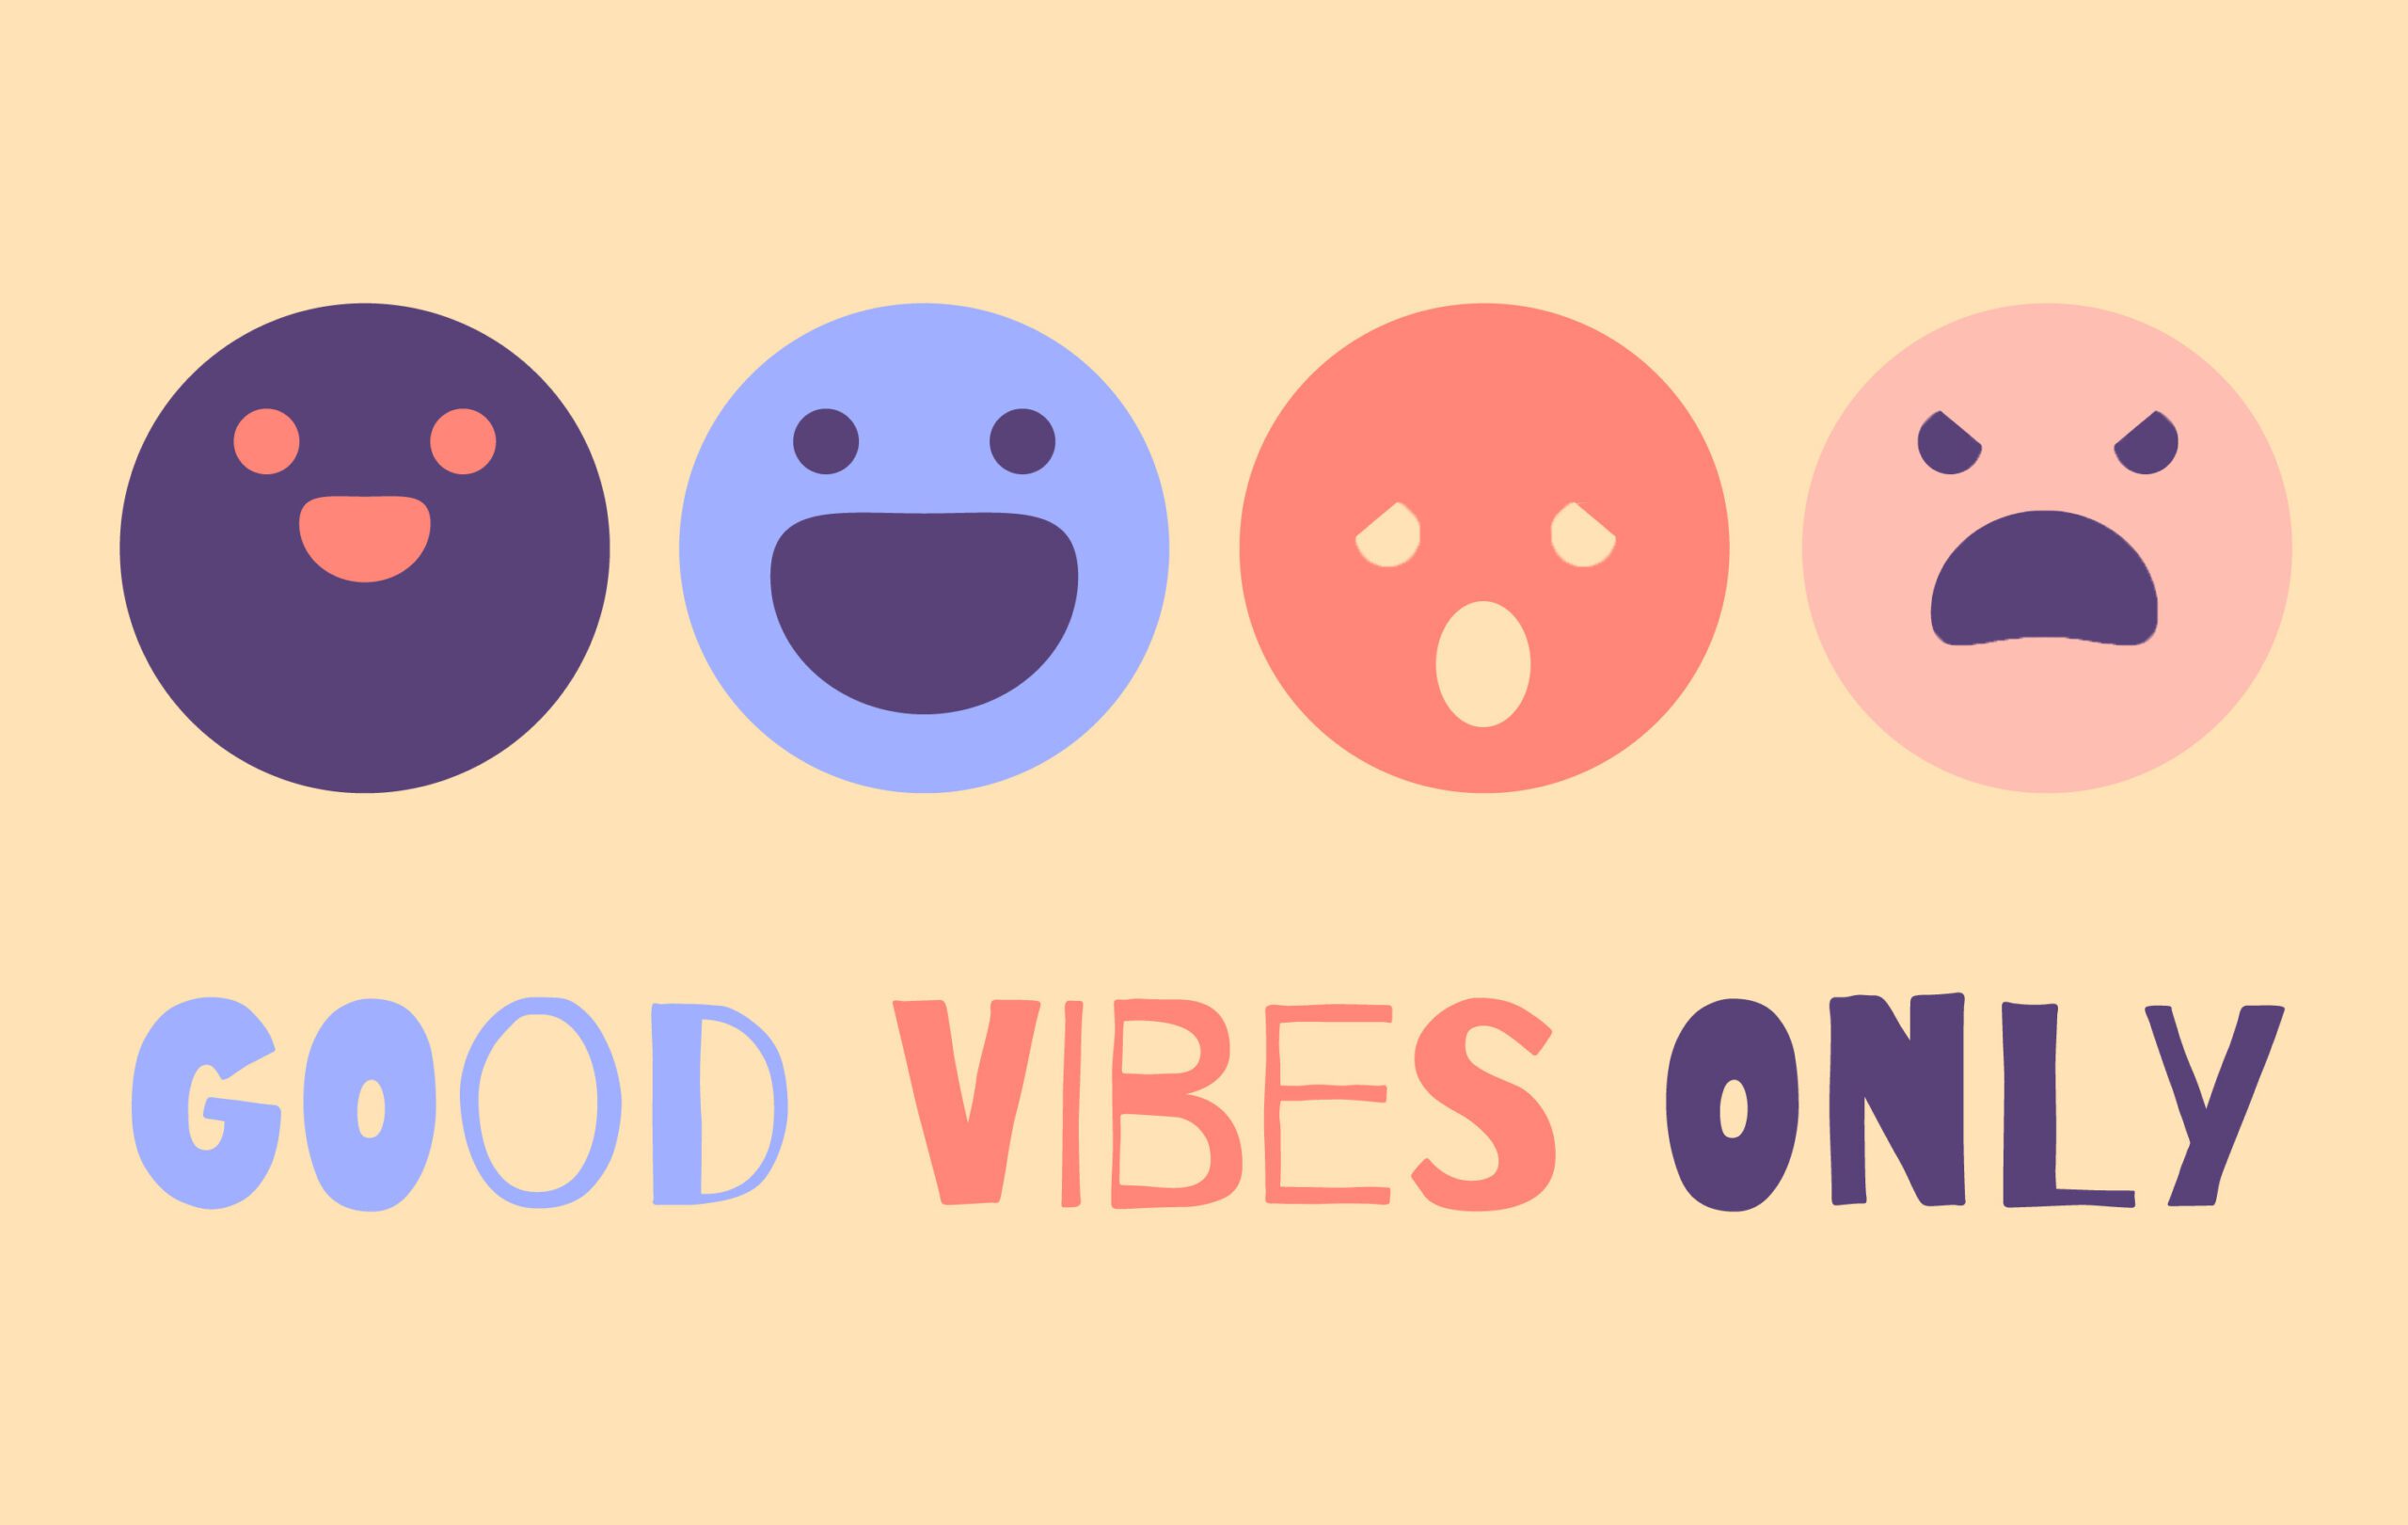 How “Good Vibes Only” Can Create Toxic Work Environments